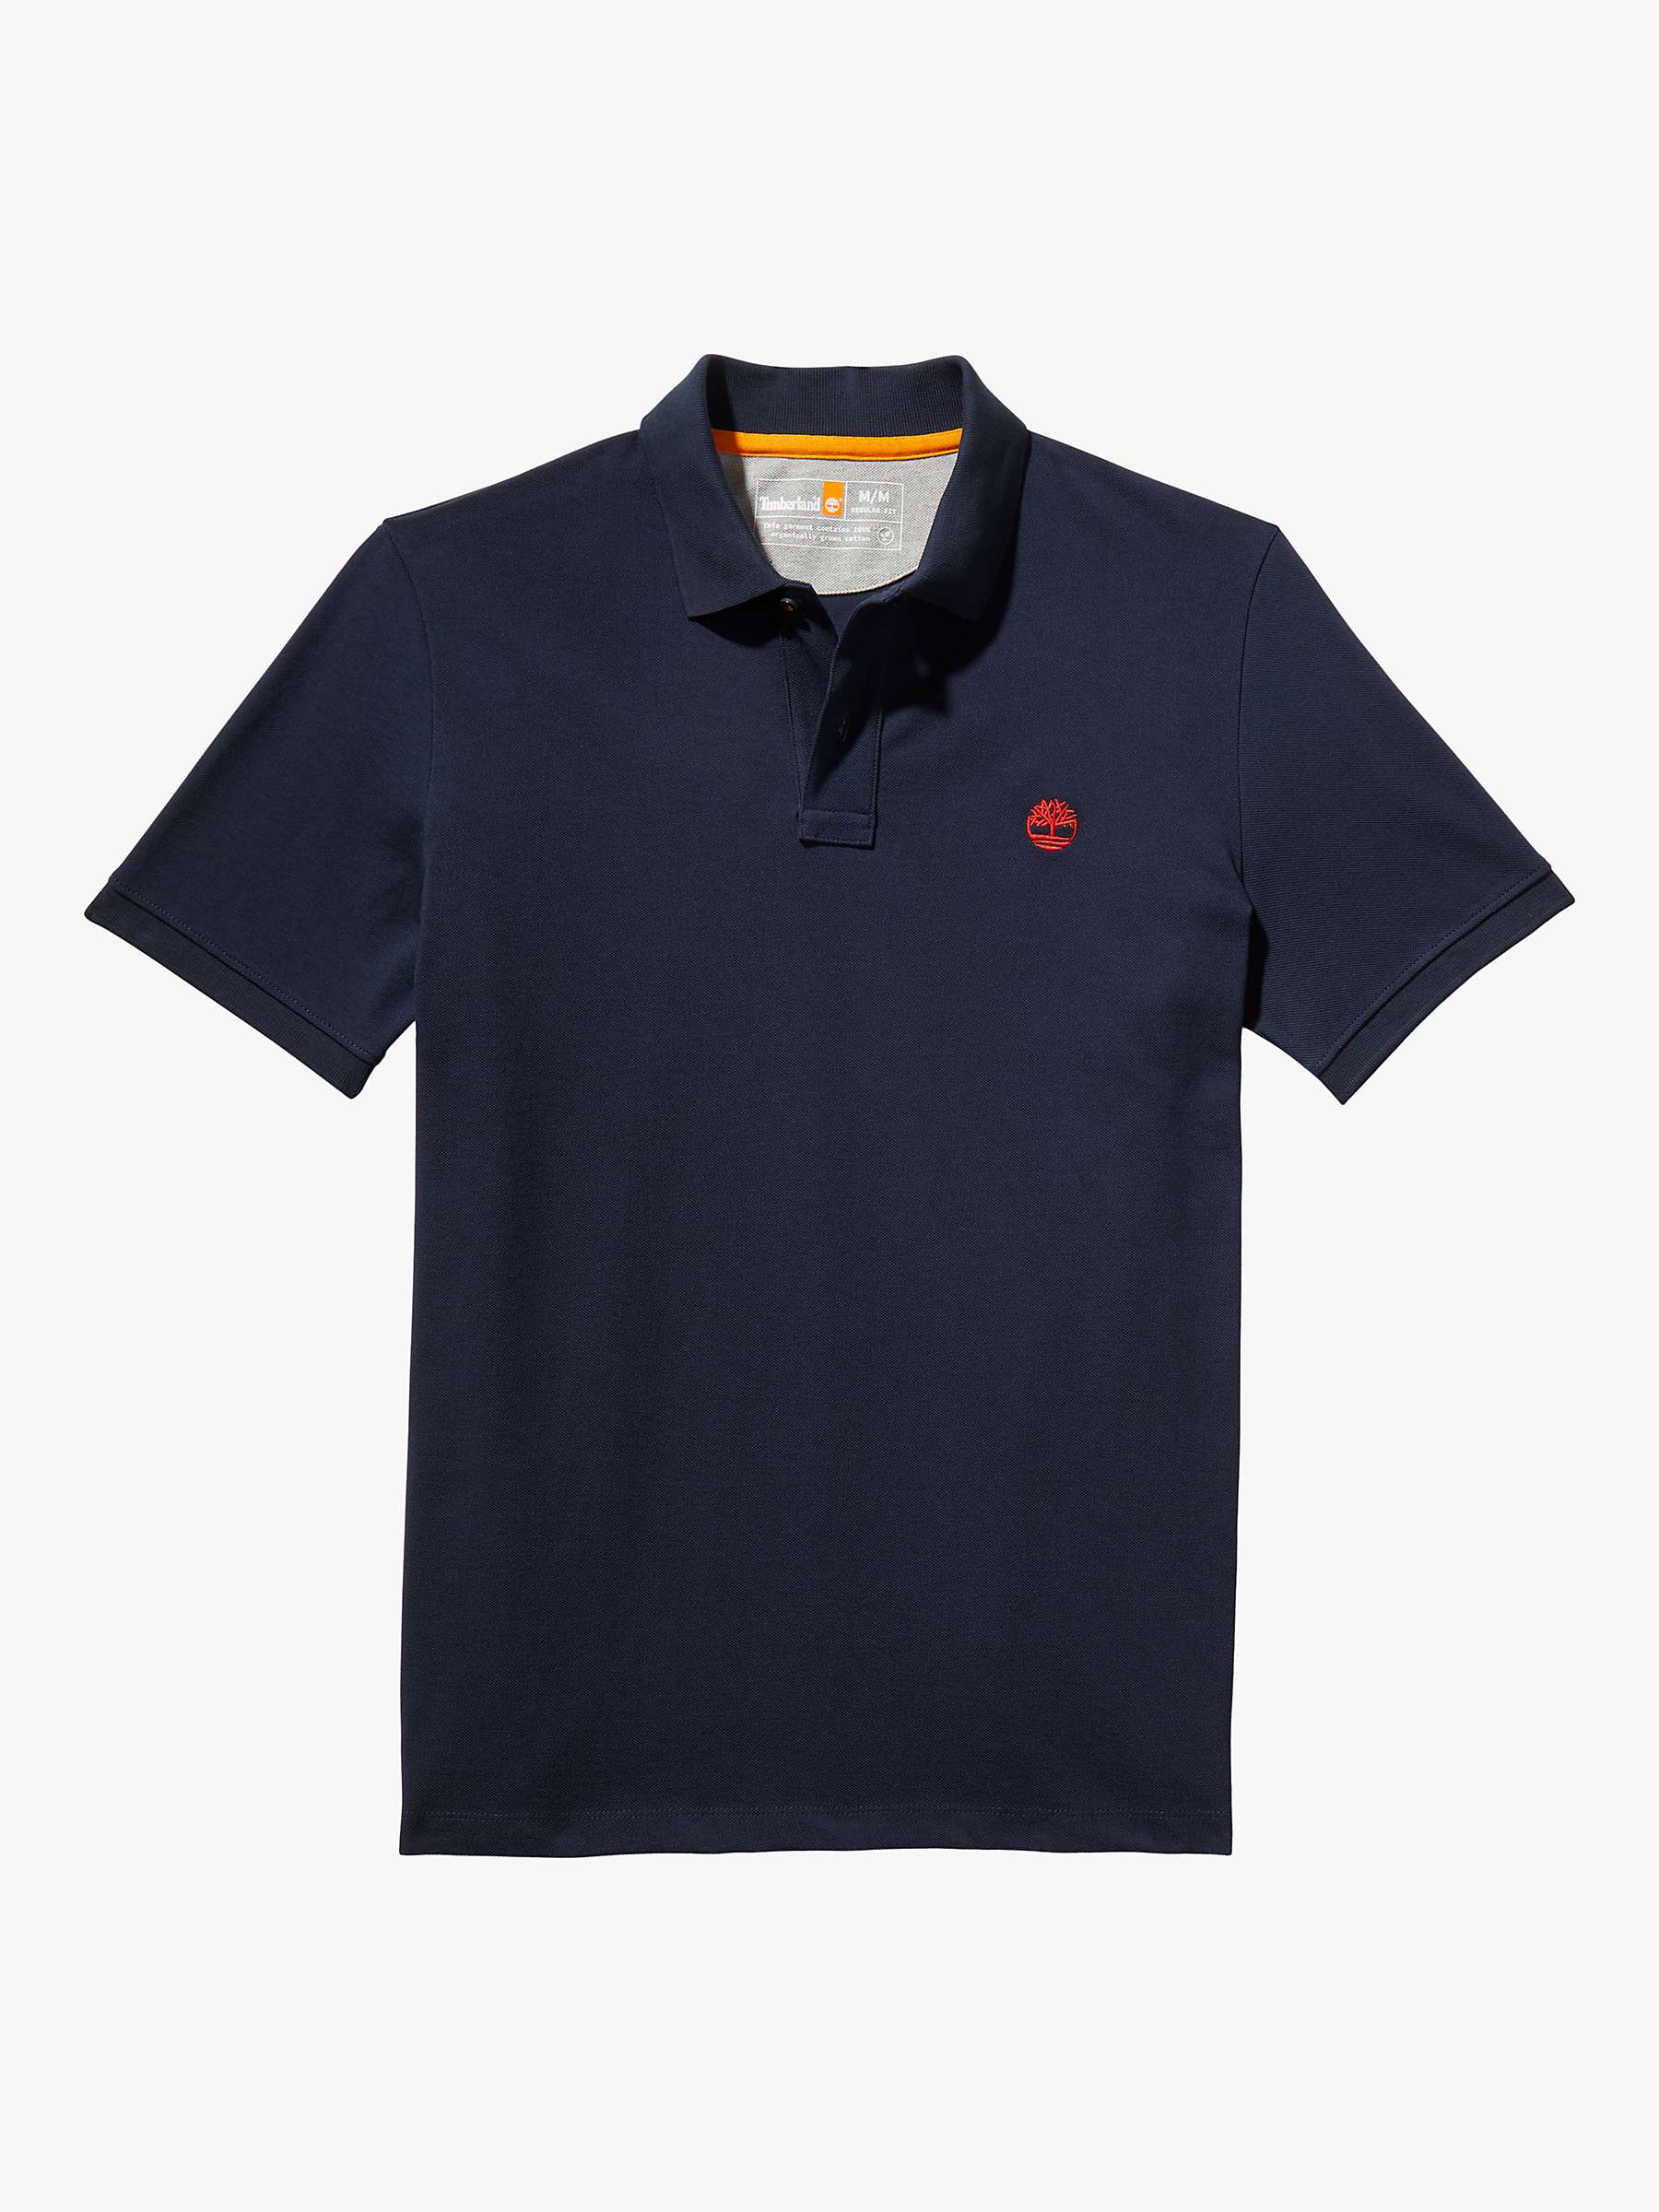 Buy Timberland Millers Rivers Short Sleeve Polo Top Online at johnlewis.com